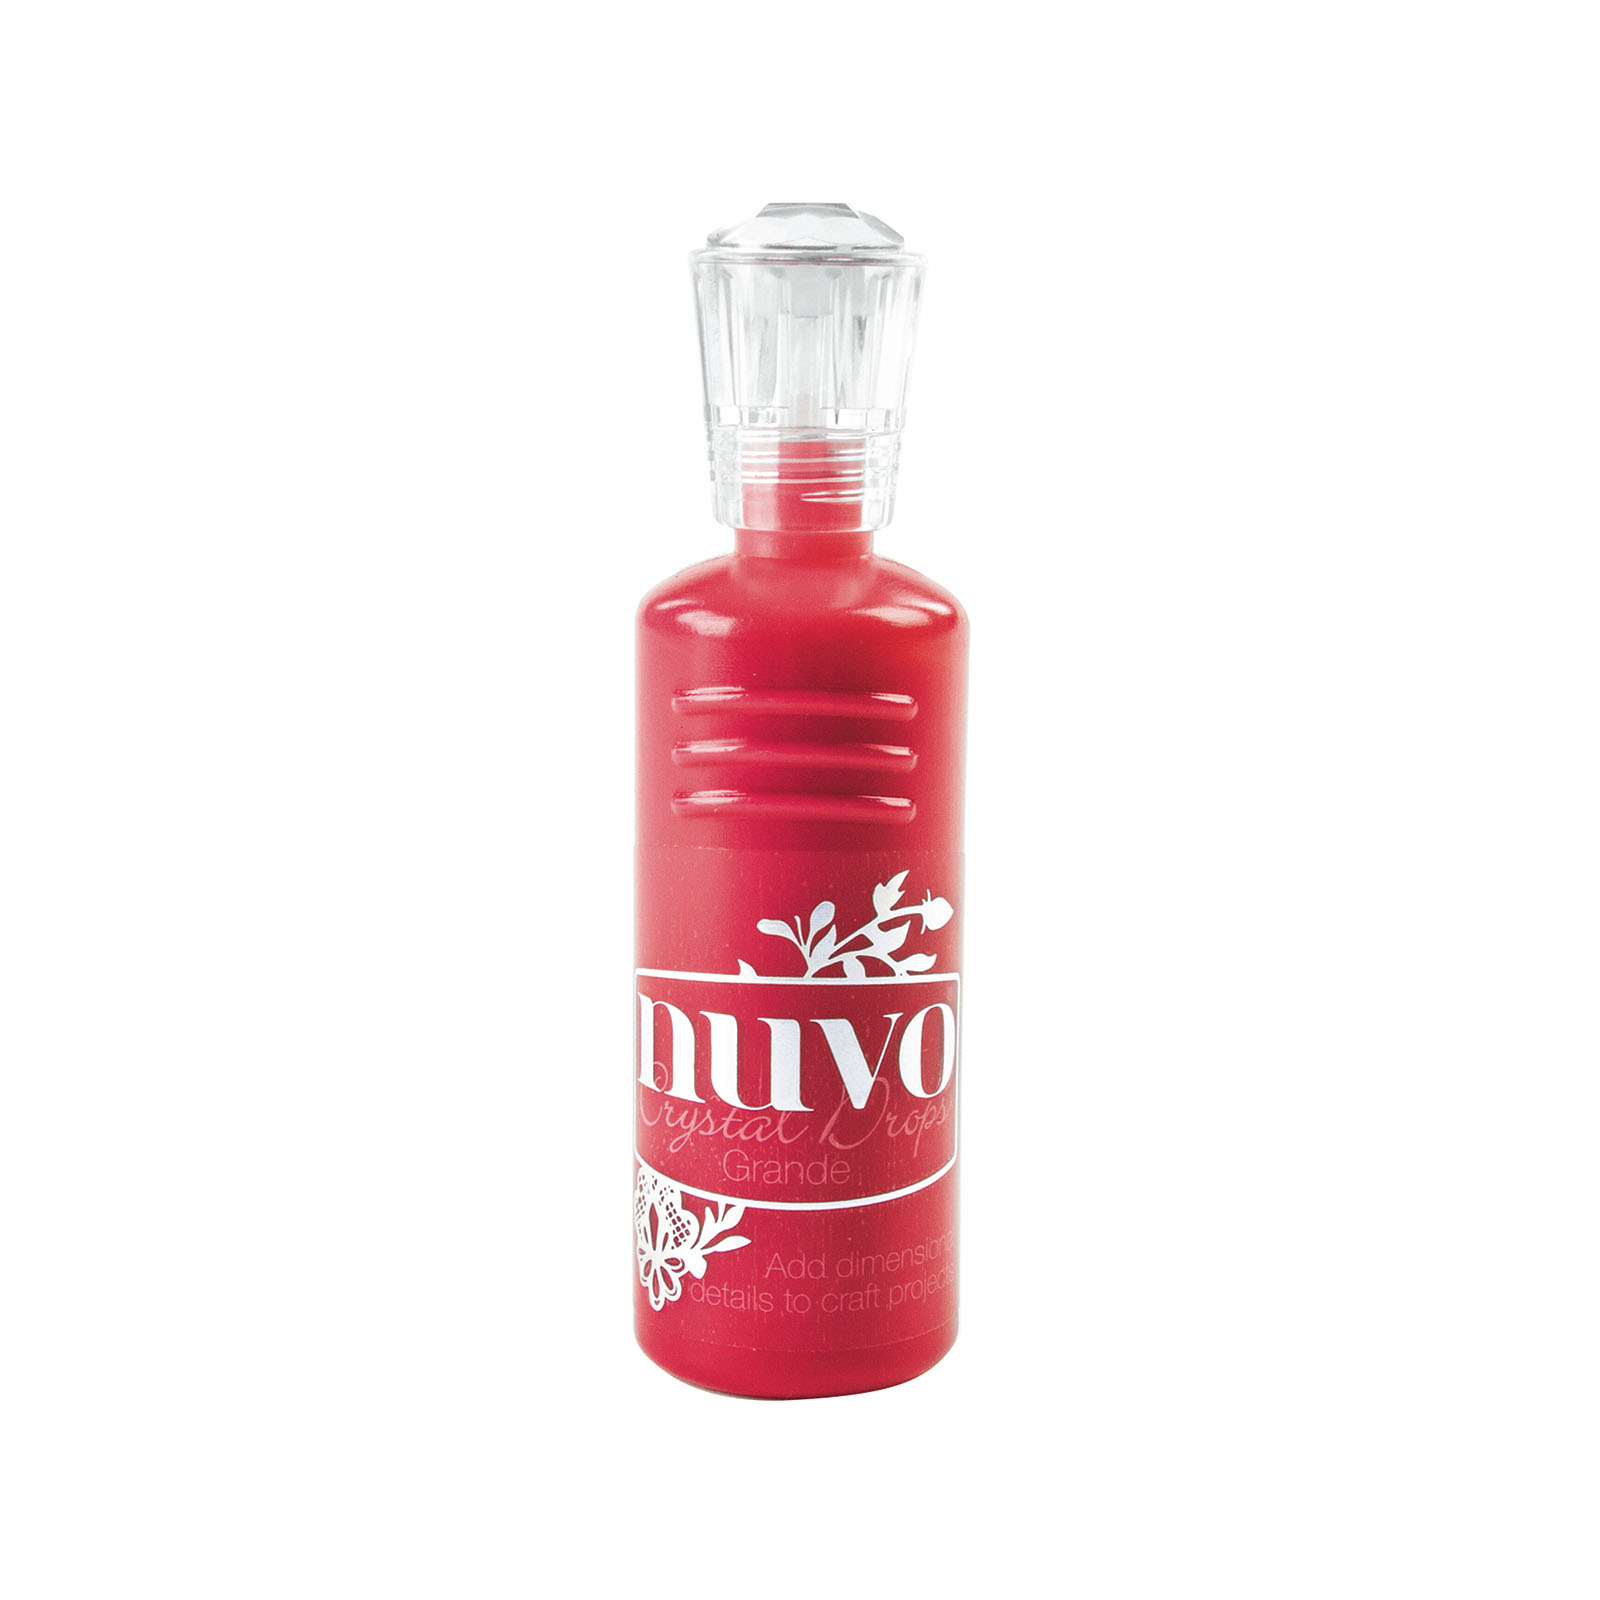 Nuvo • Grande drops Gloss red berry